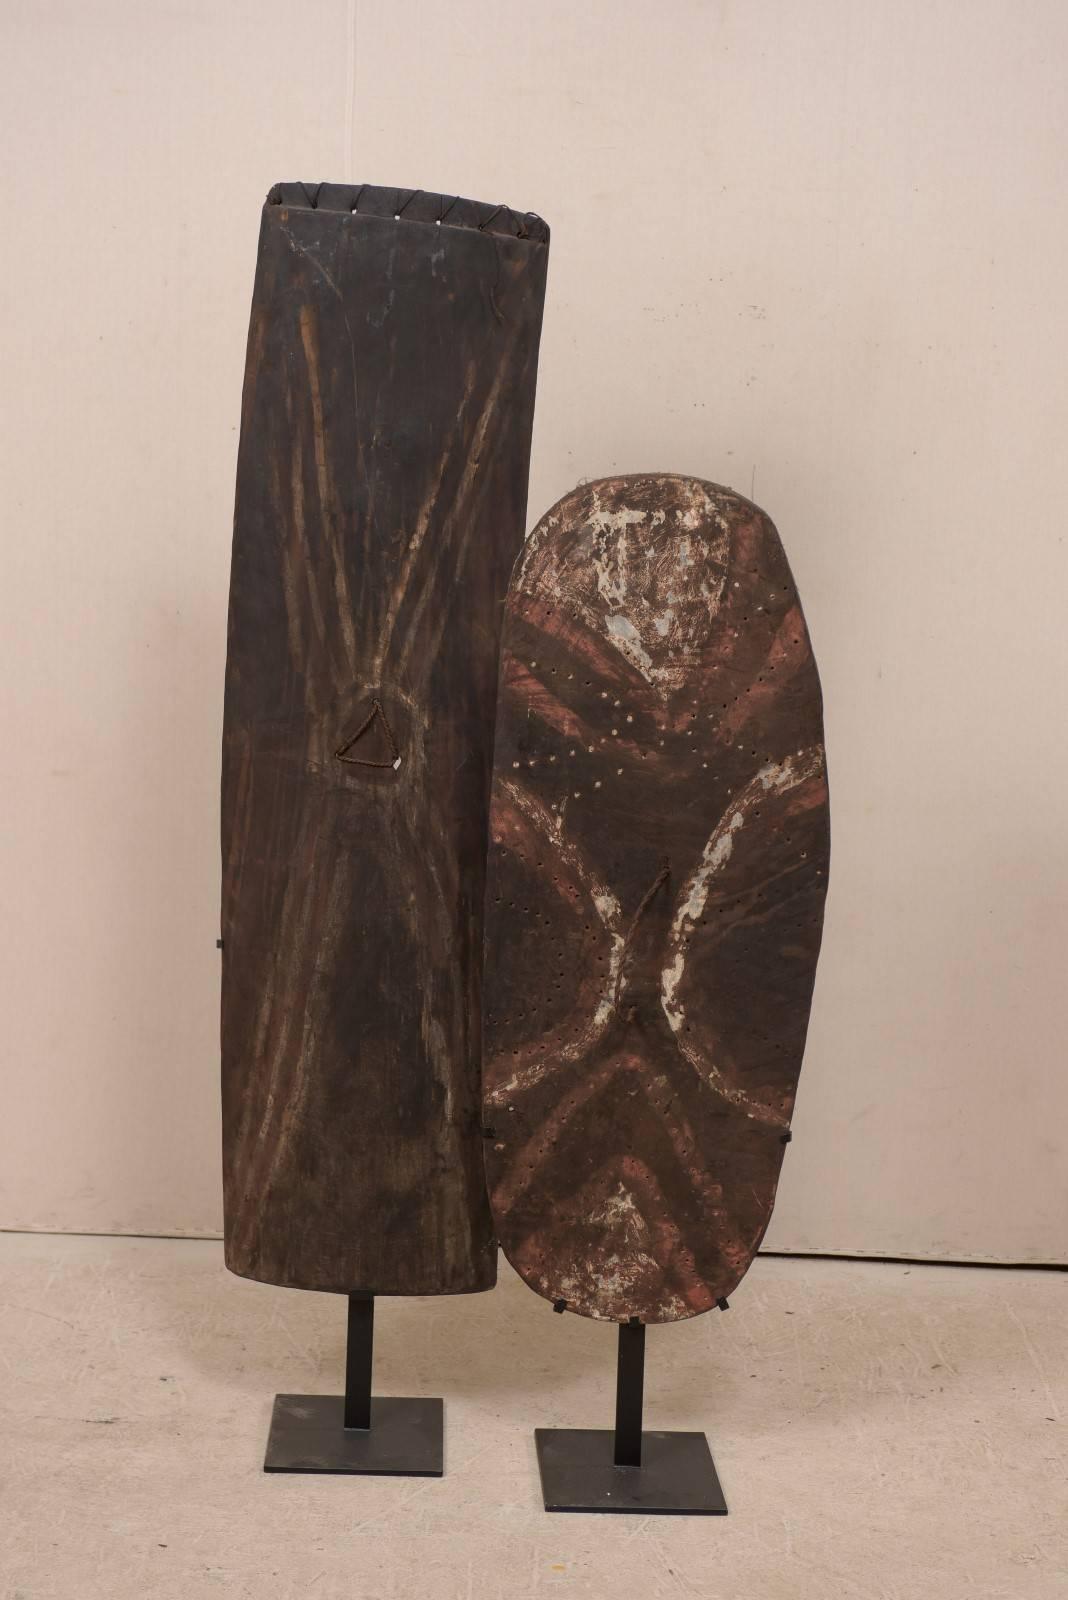 A pair of Papua New Guinea wooden shields on custom stands from the mid 20th century. These oceanic war shields were not only created for protecting oneself for tribal warfare, but also in ancestral and ritual worship. They are adorn in various